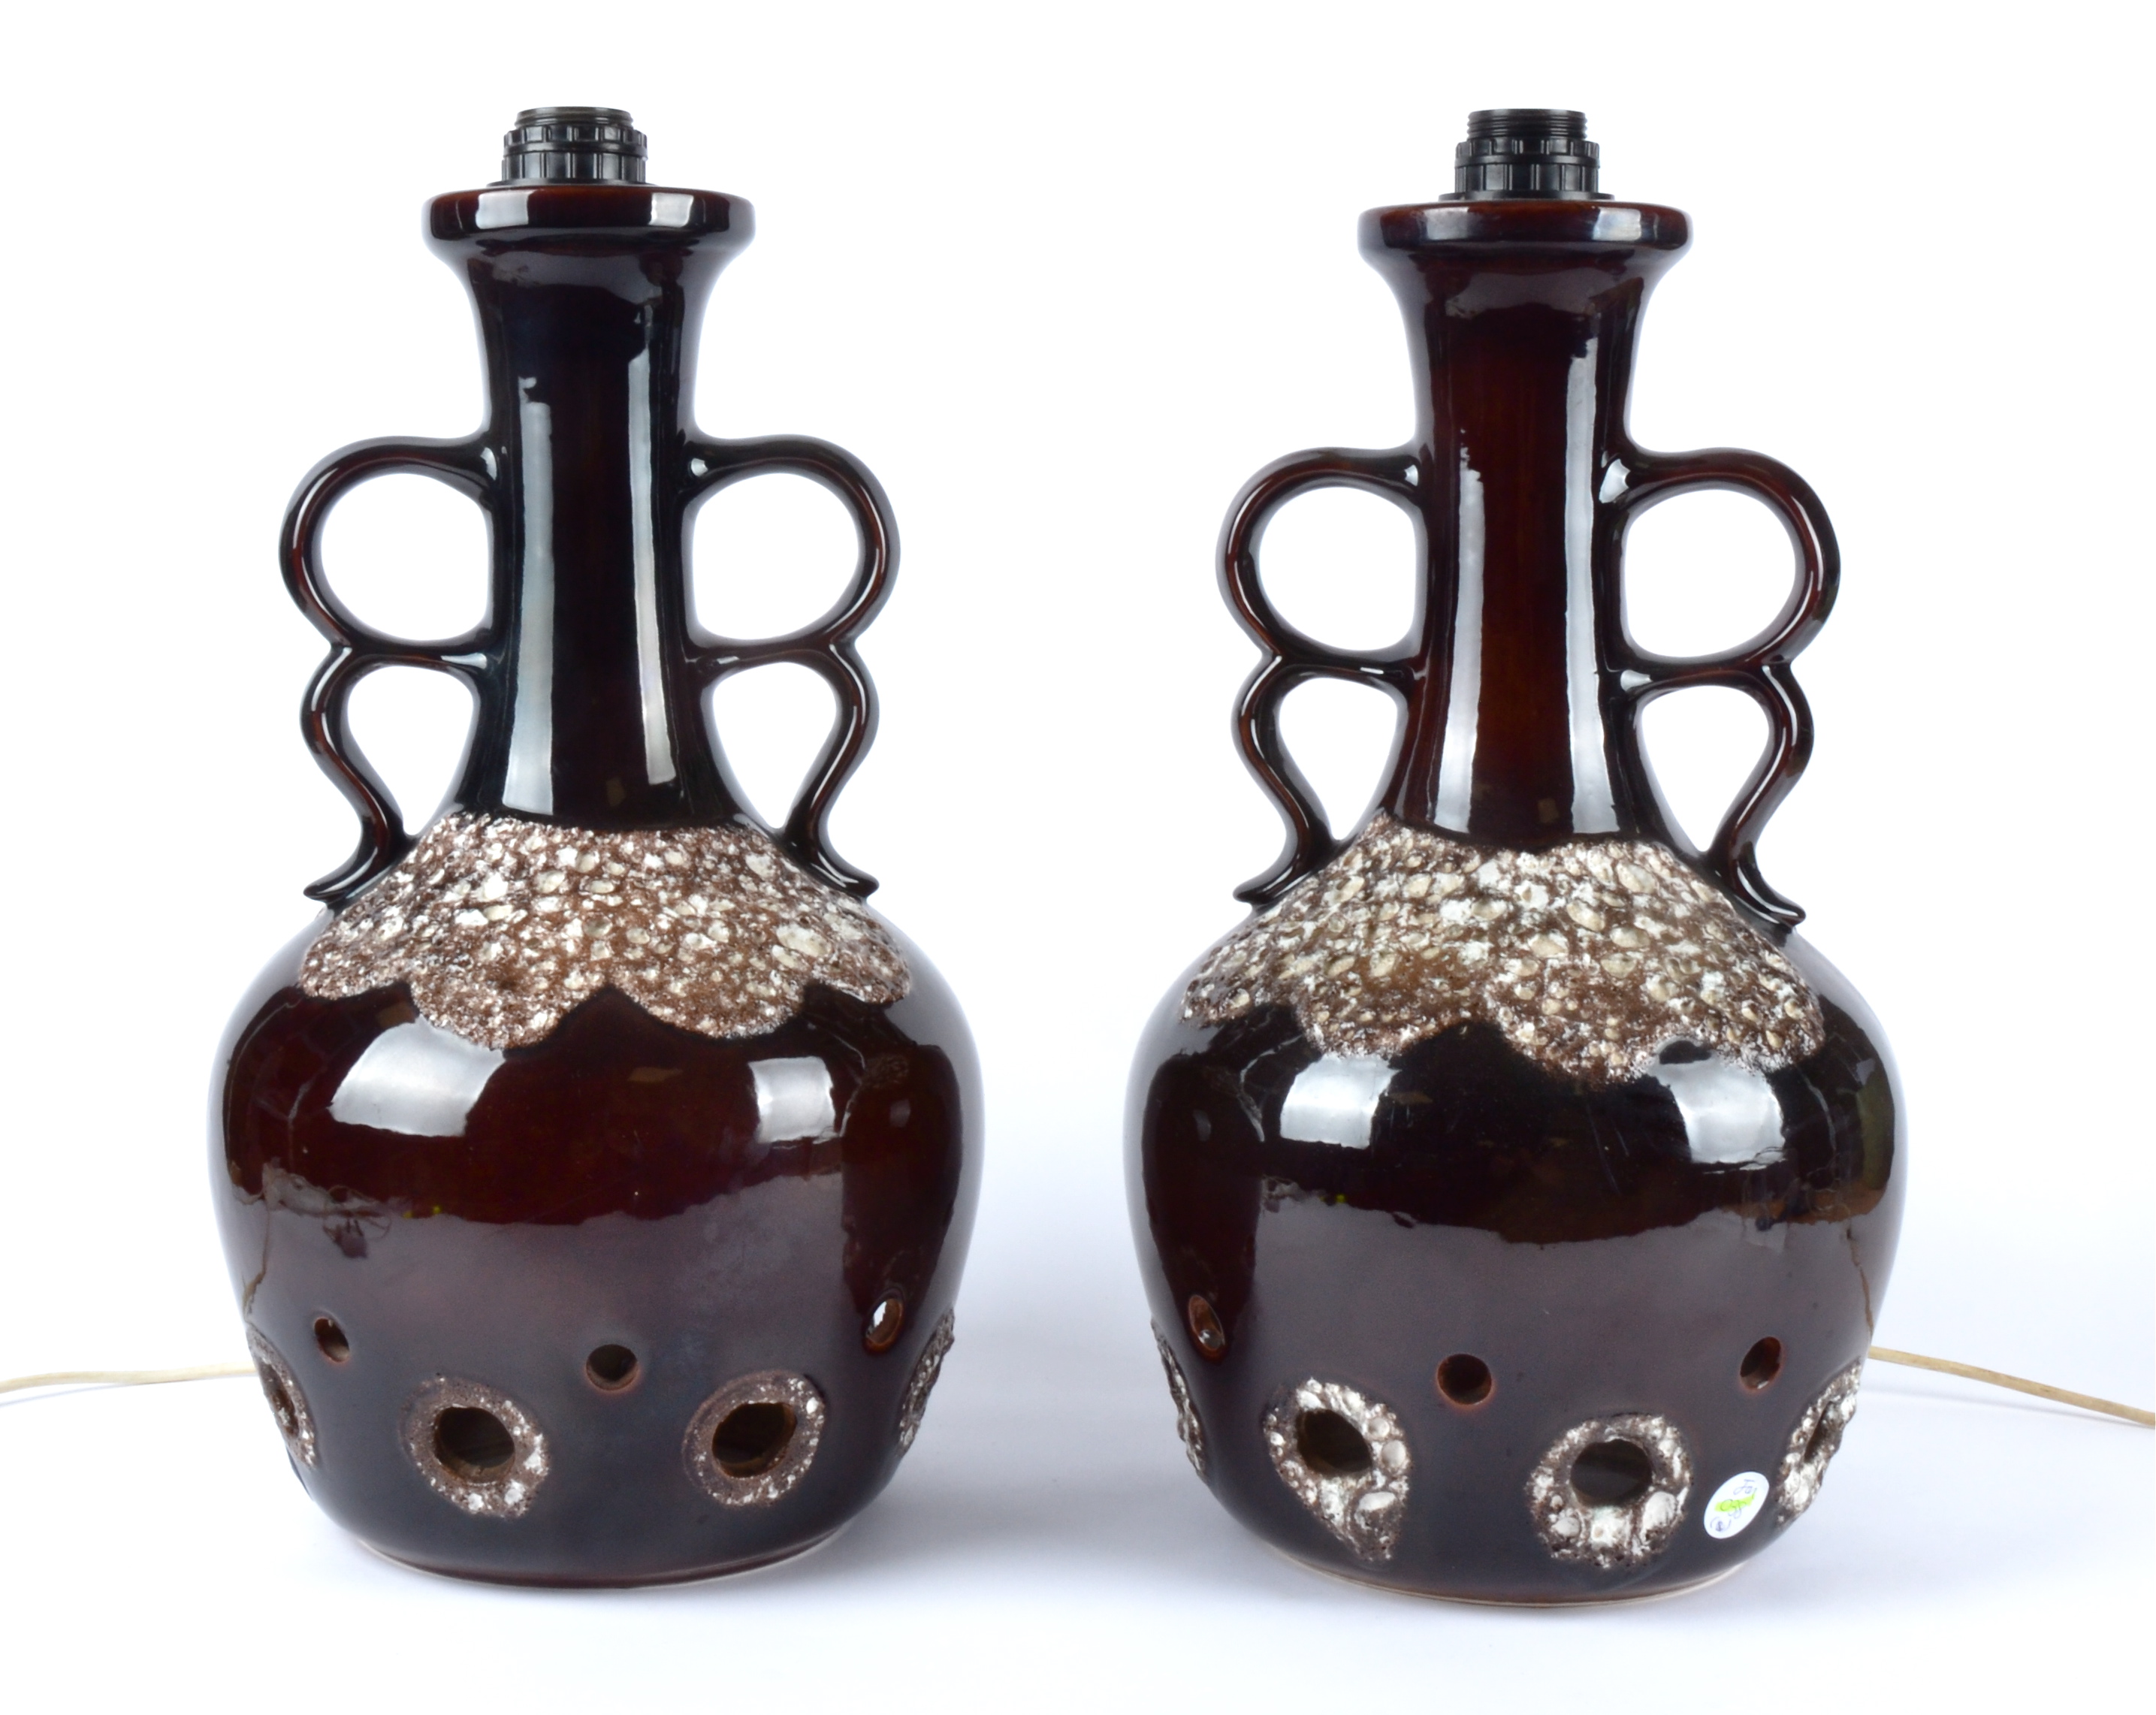 A pair of West German pottery lamp bases, with twin handles, brown glaze simulating the surface of